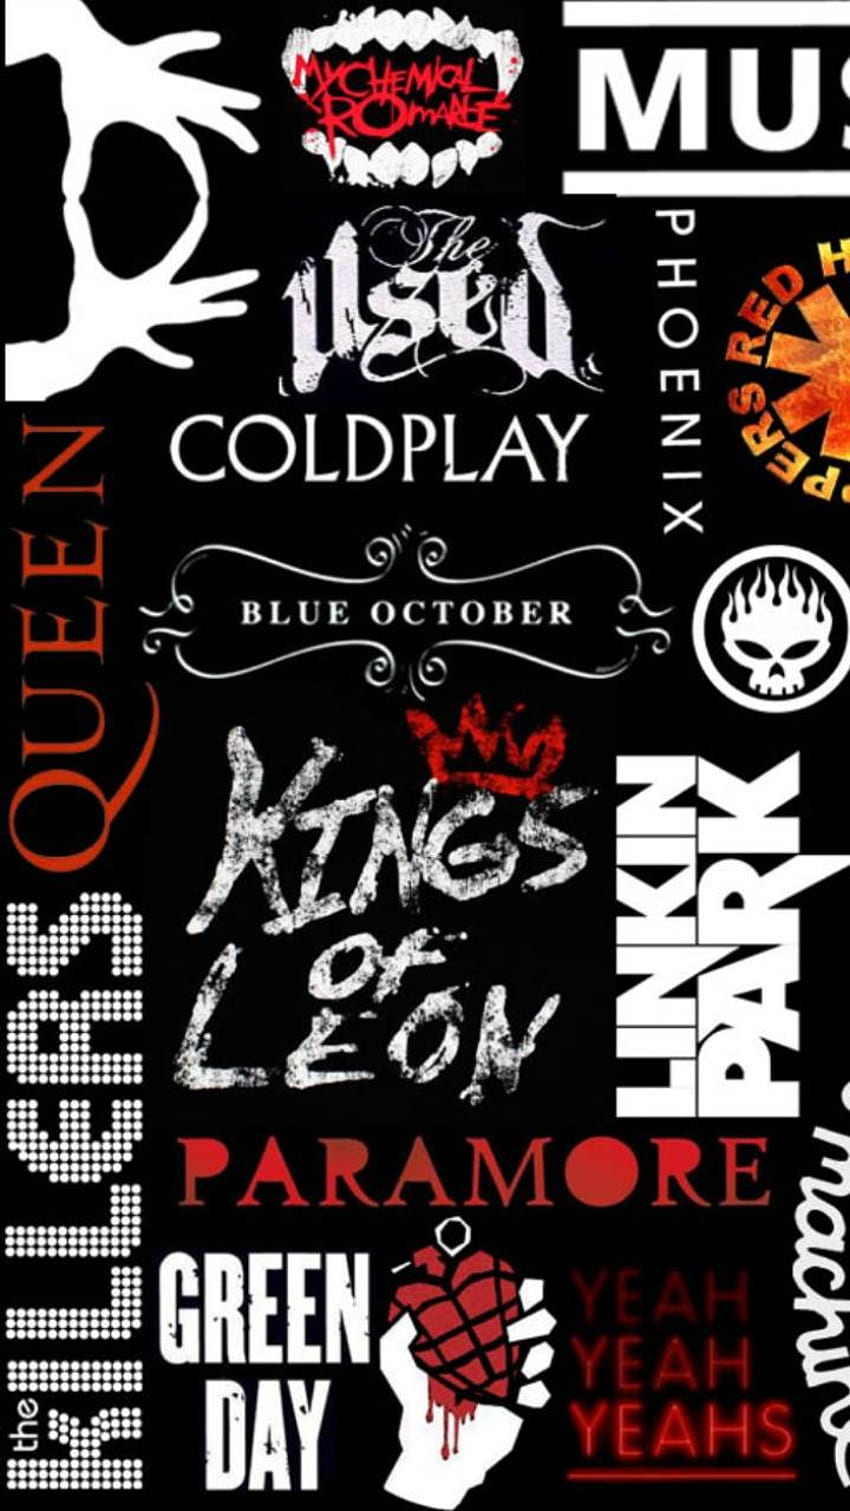 Kiss Wallpaper Band - Apps on Google Play